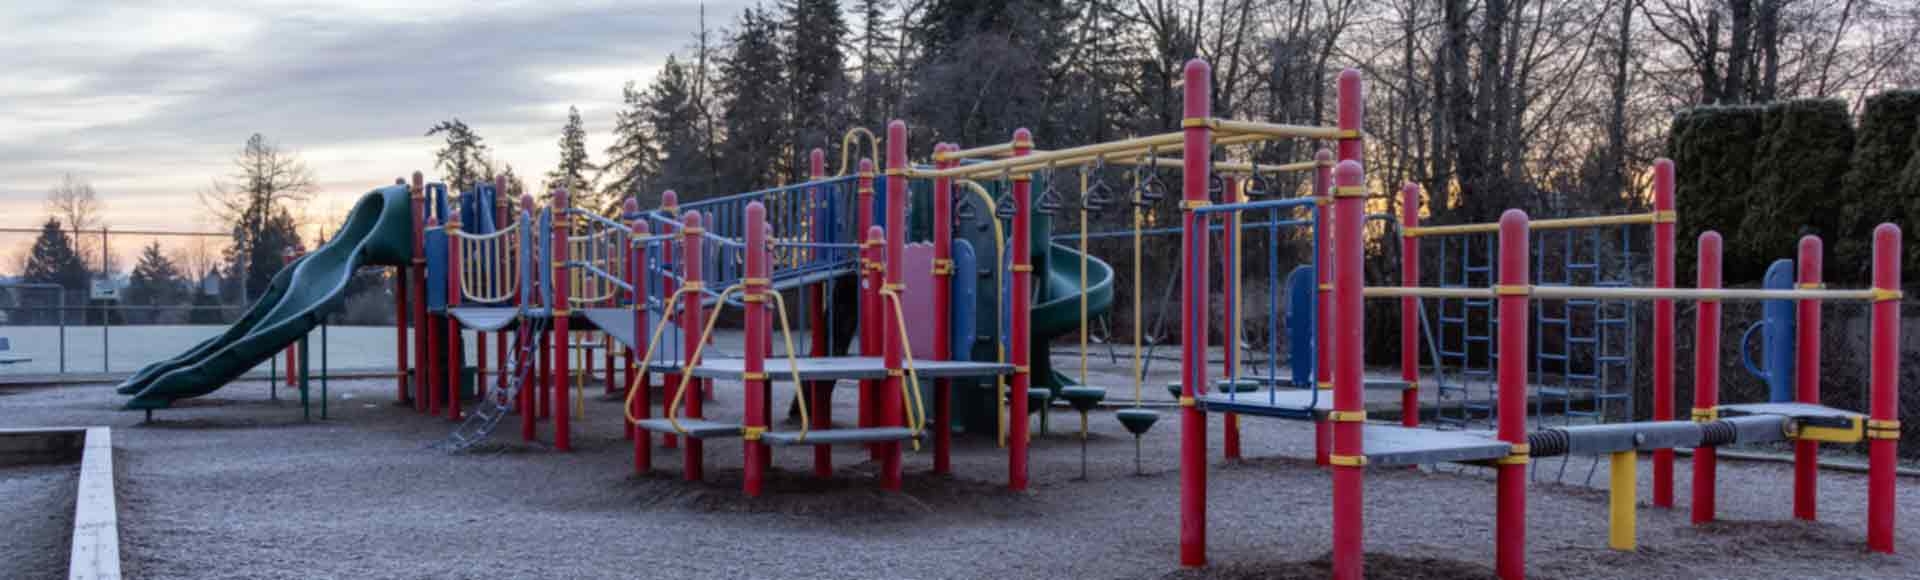 How To Keep the Kids Safe at the Playground in Winter